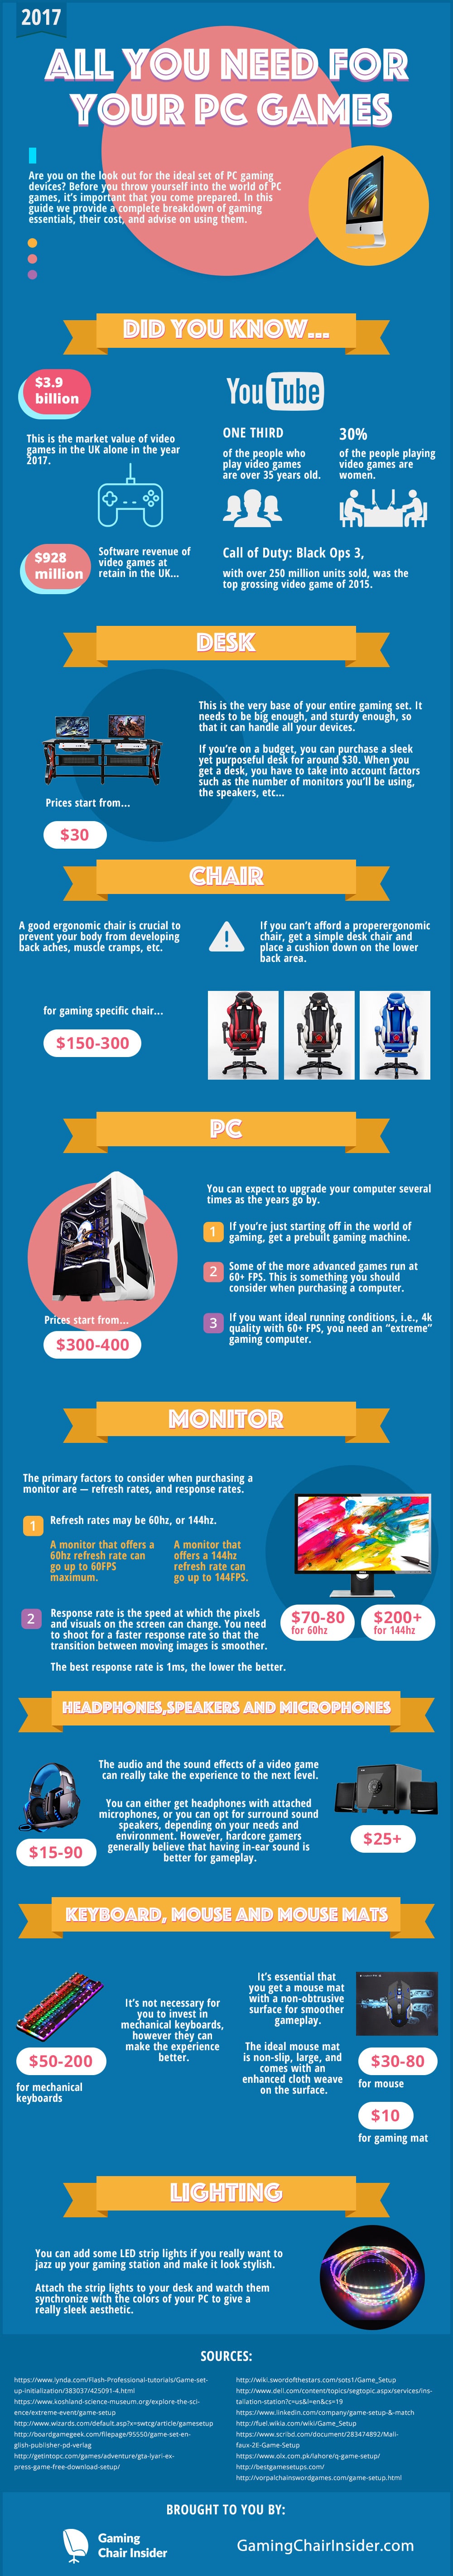 Gaming PC Setup Guide Infographic